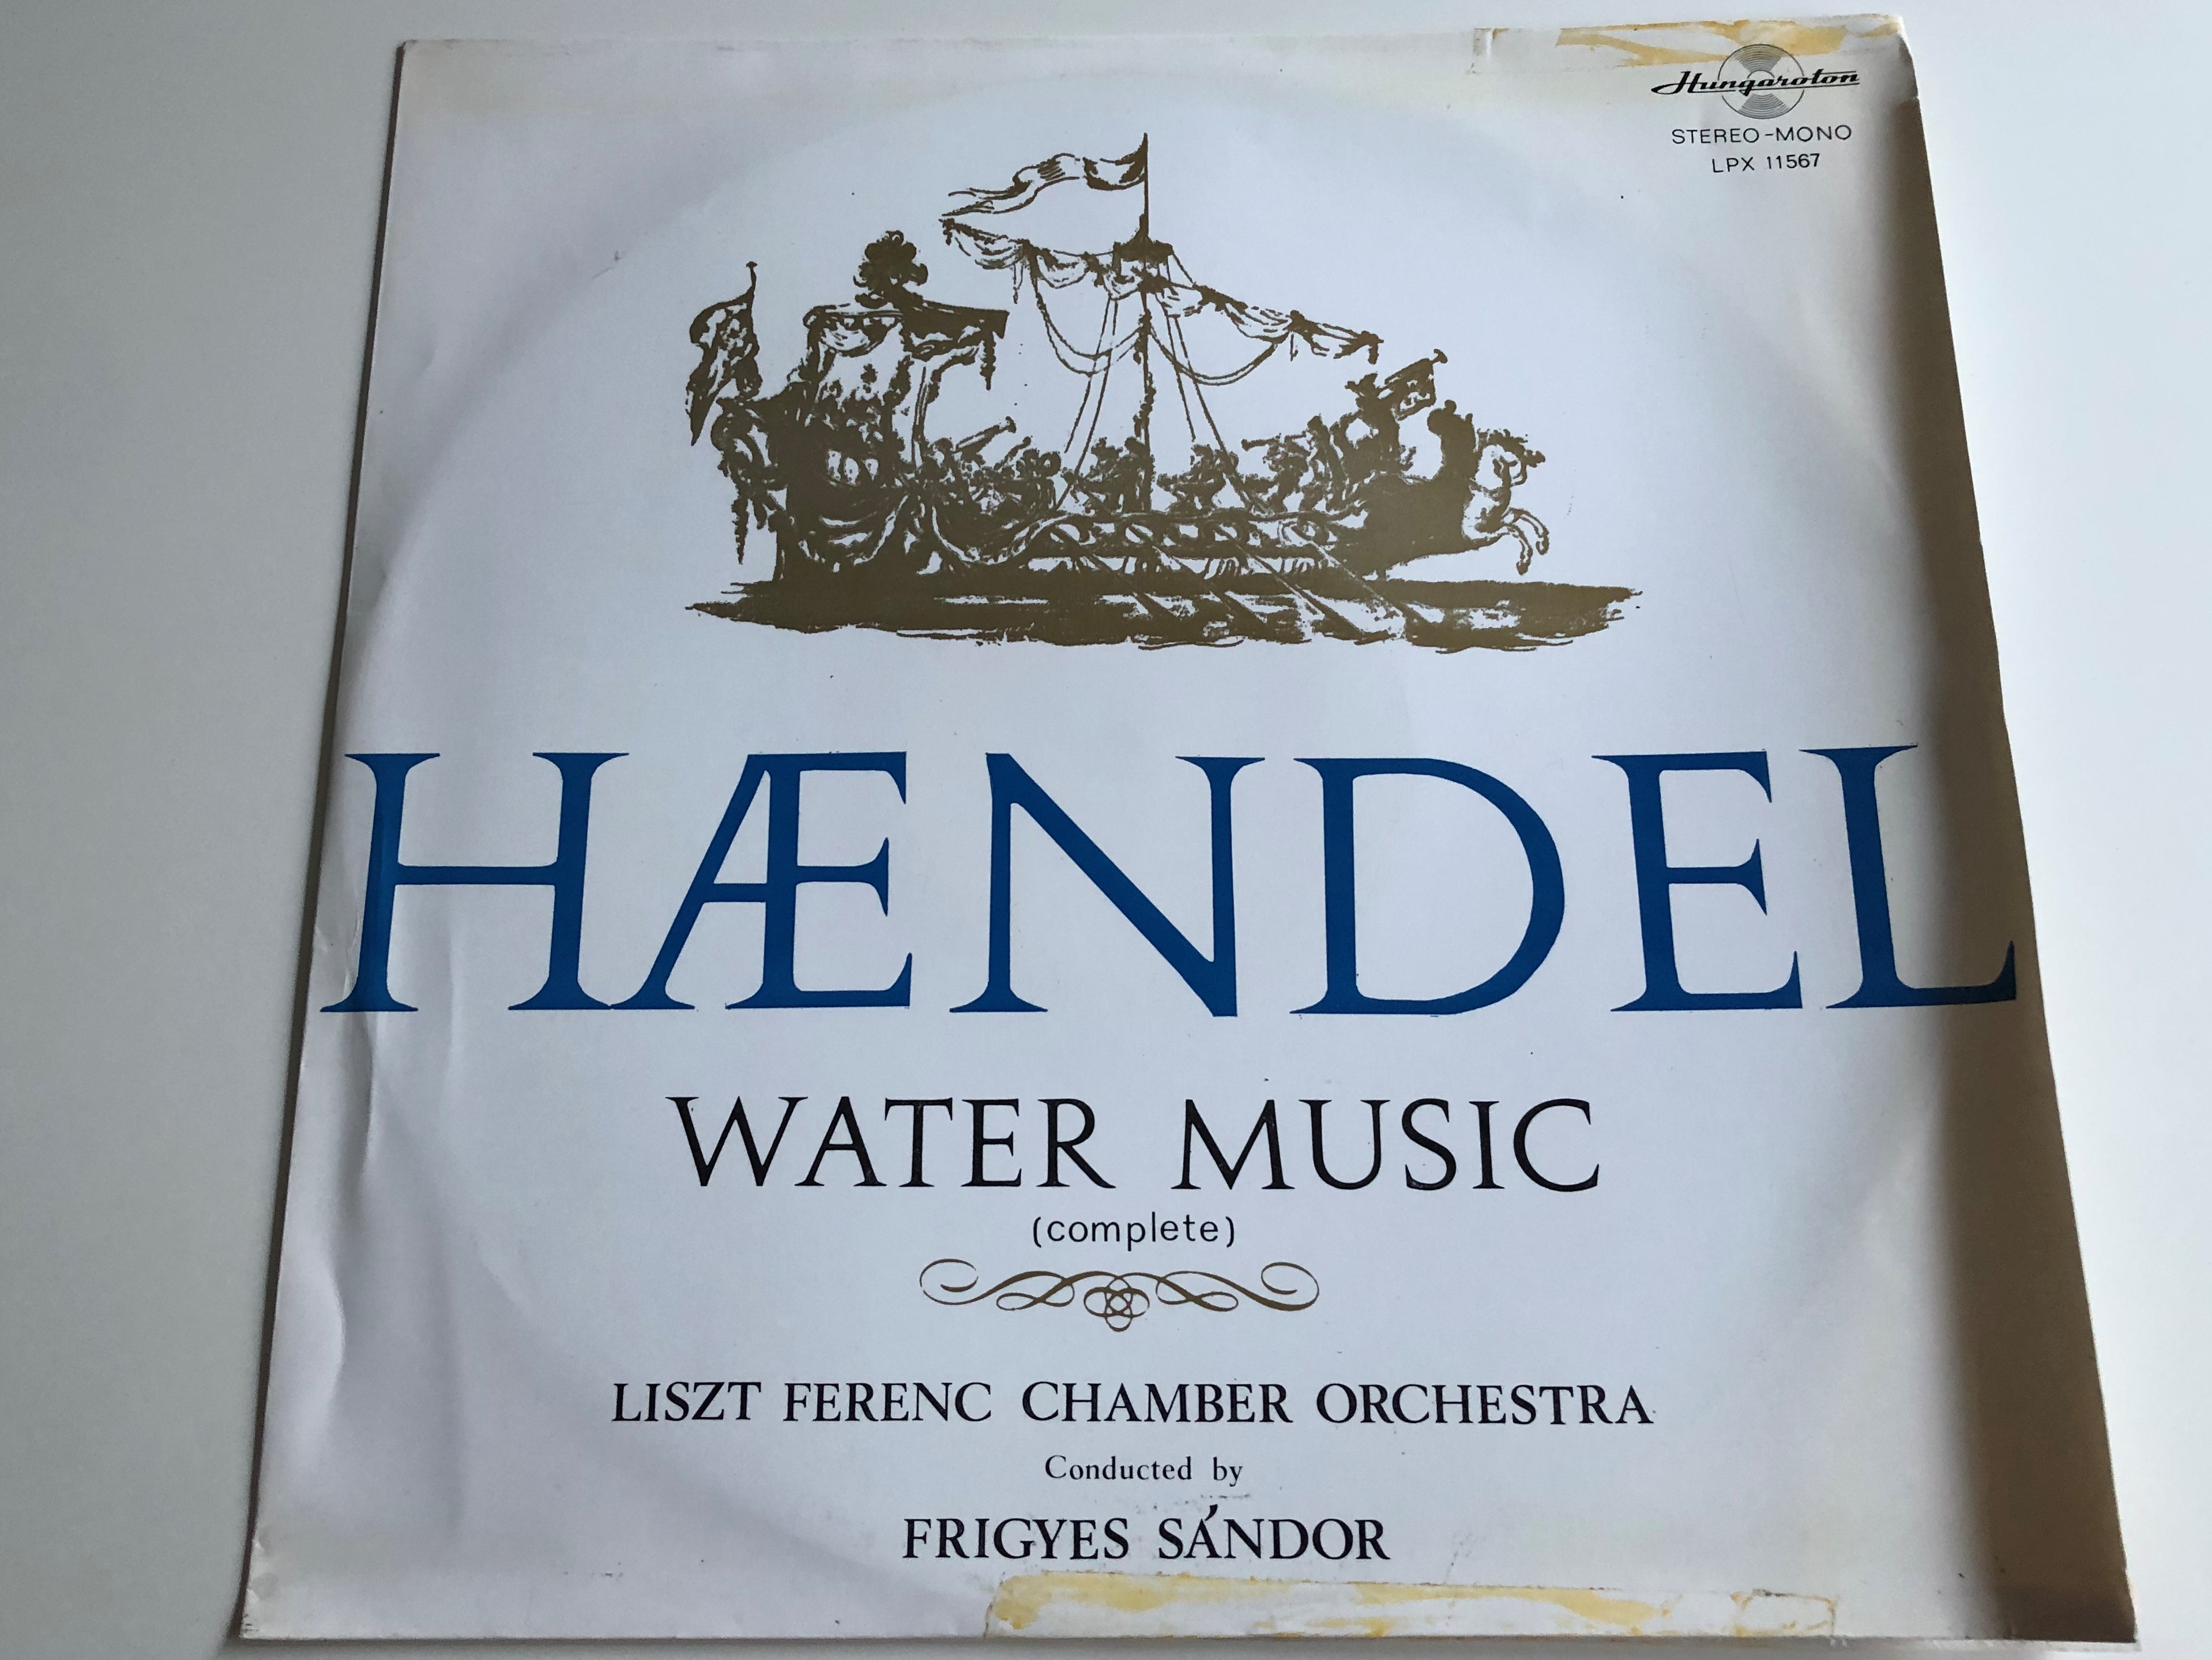 haendel-water-music-complete-liszt-ferenc-chamber-orchestra-conducted-frigyes-s-ndor-hungaroton-lp-stereo-mono-lpx-11567-1-.jpg